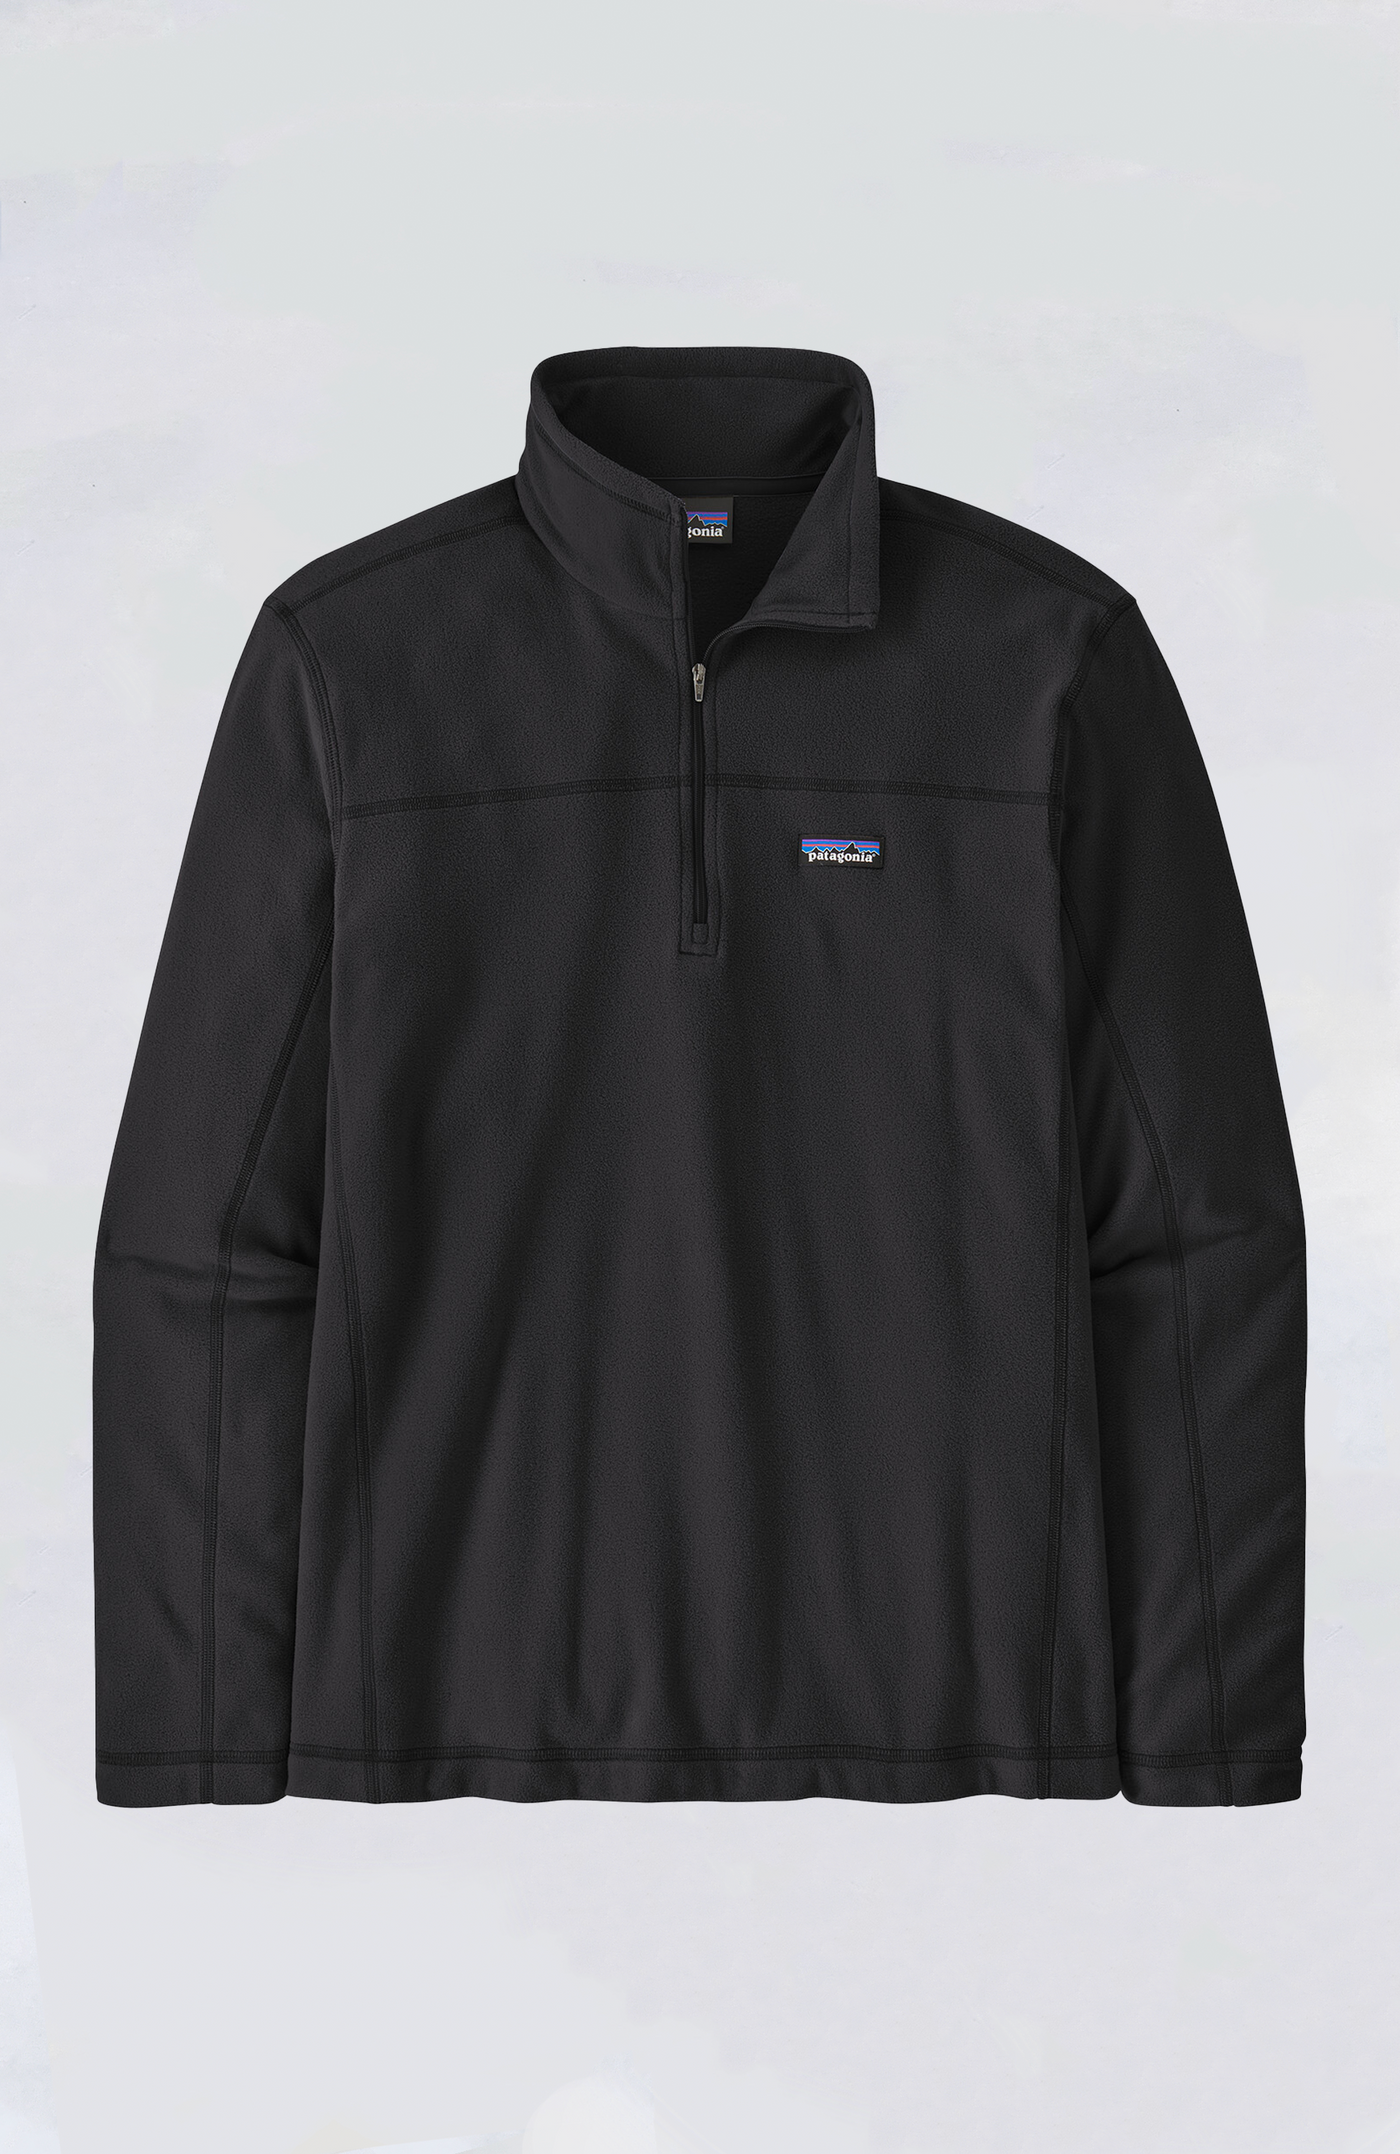 Patagonia Pullover Jacket - M's Micro D P/O